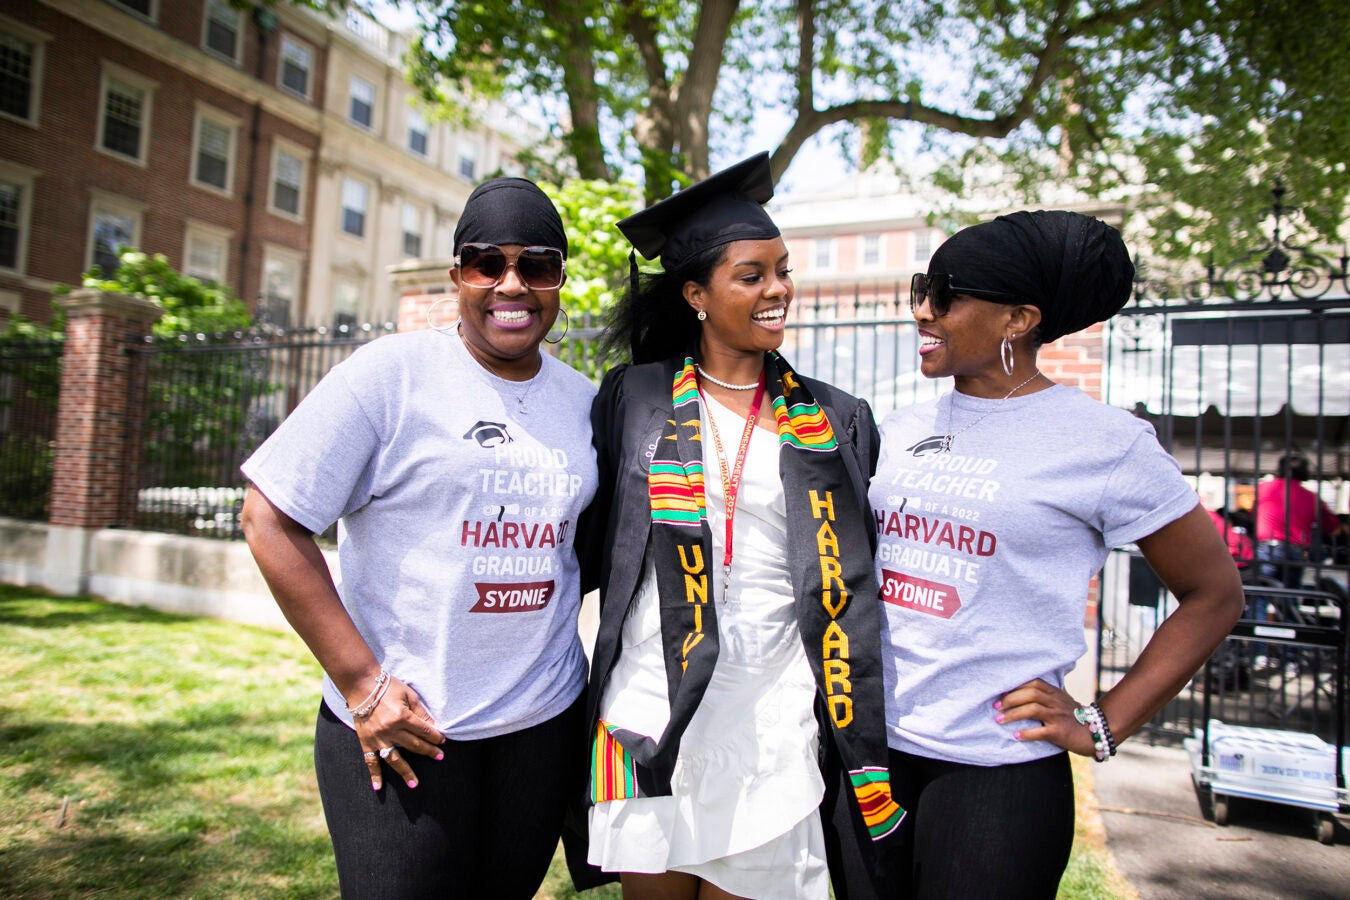 Sydnie Cobb in cap and gown flanked by twins Aprile and Deanna Thomas, who were wearing matching T-shirts that read "Proud Teacher of a 2022 Harvard Graduate."